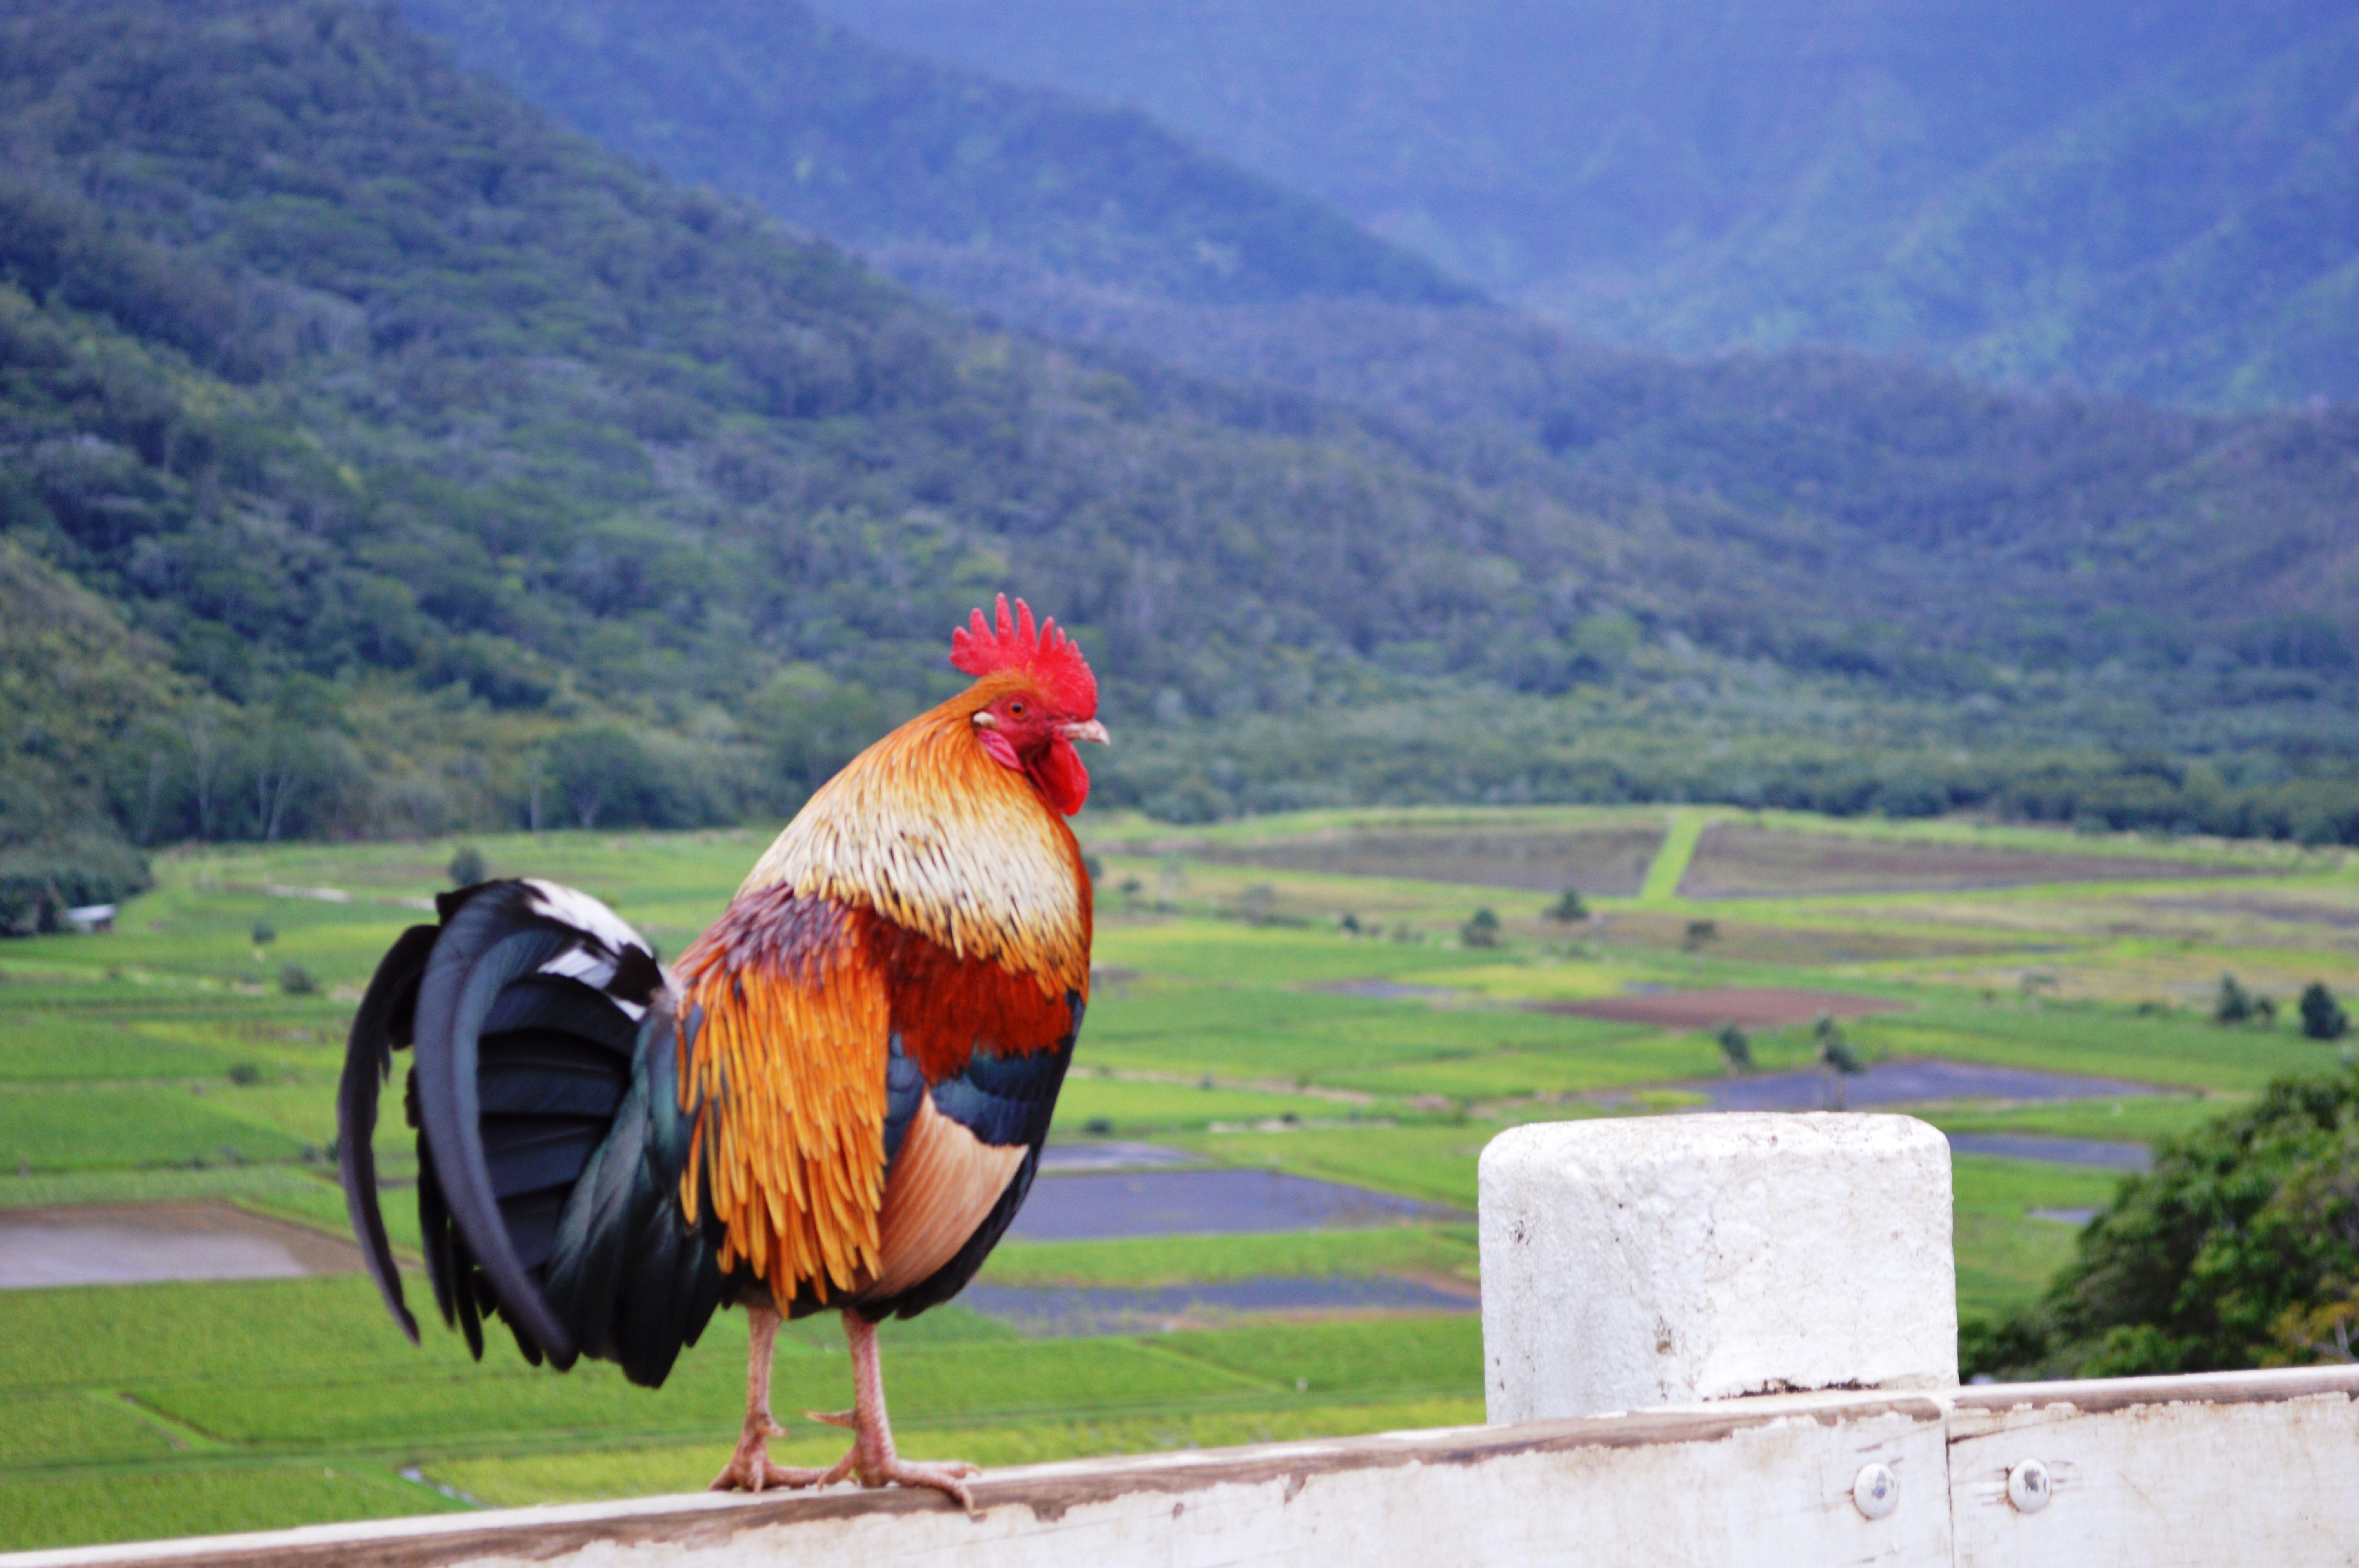 Most Famous Rooster Logo - Kauai's Wild Chickens: The good, the bad, and the ugly!